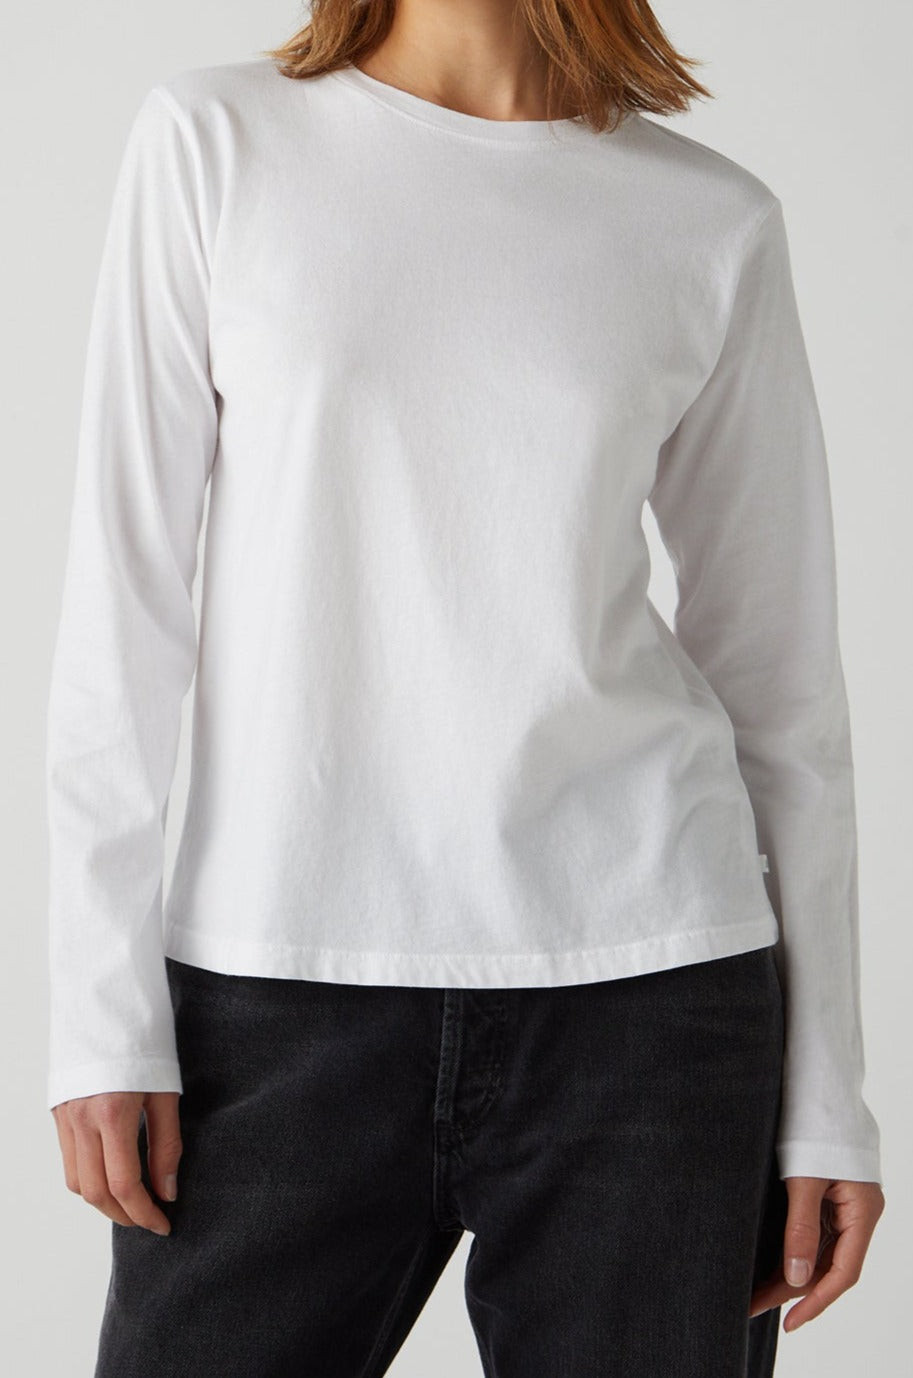 Vicente Tee in white front-25484363694273